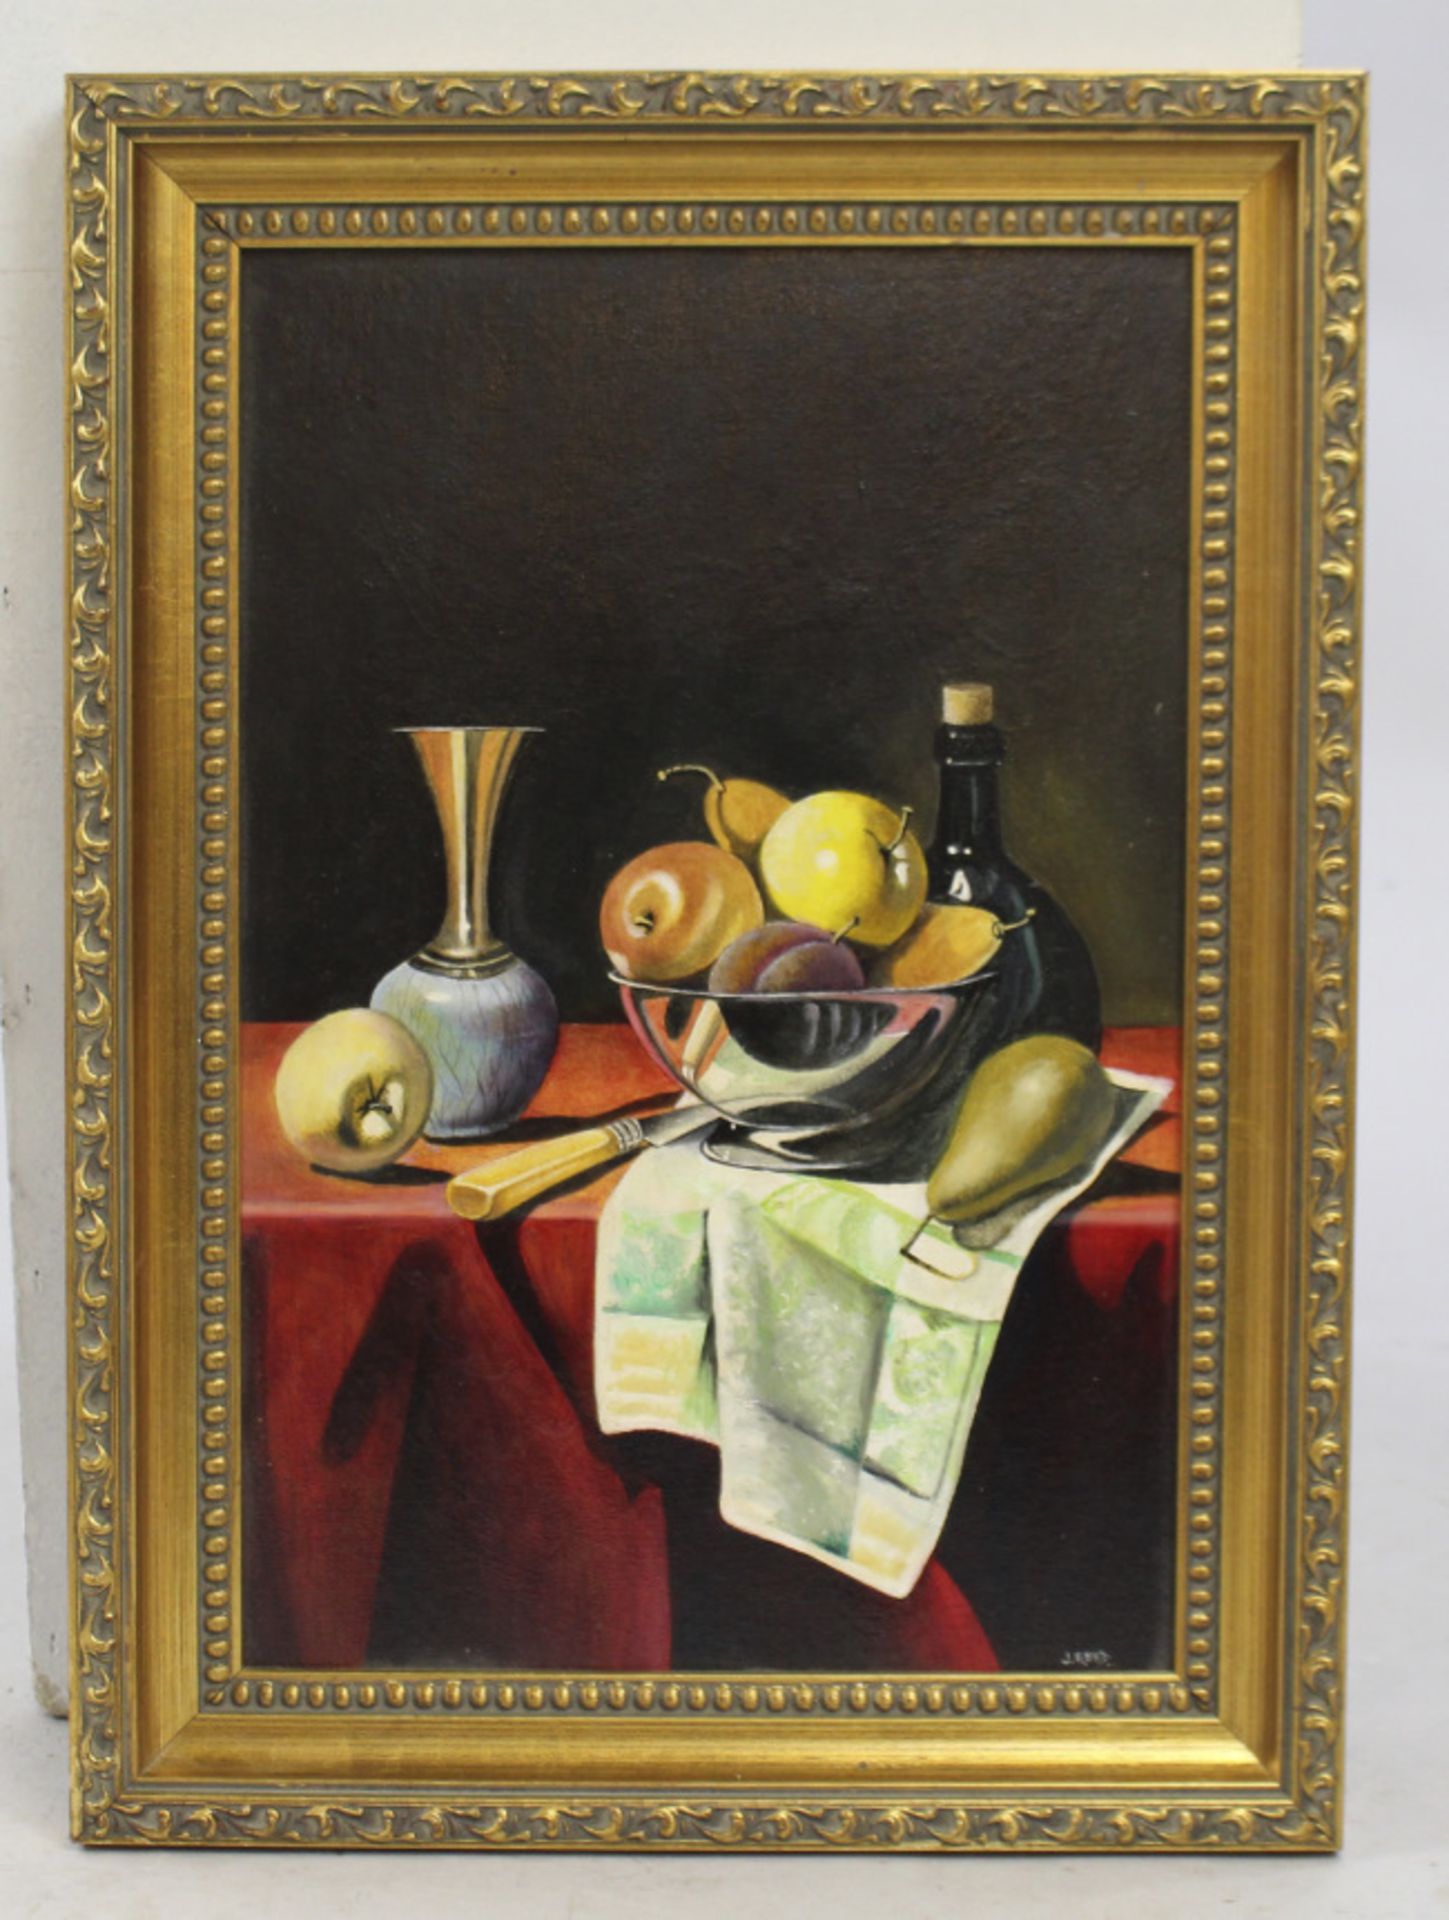 Golden Age Style Still Life by J.Reed Oil on Board